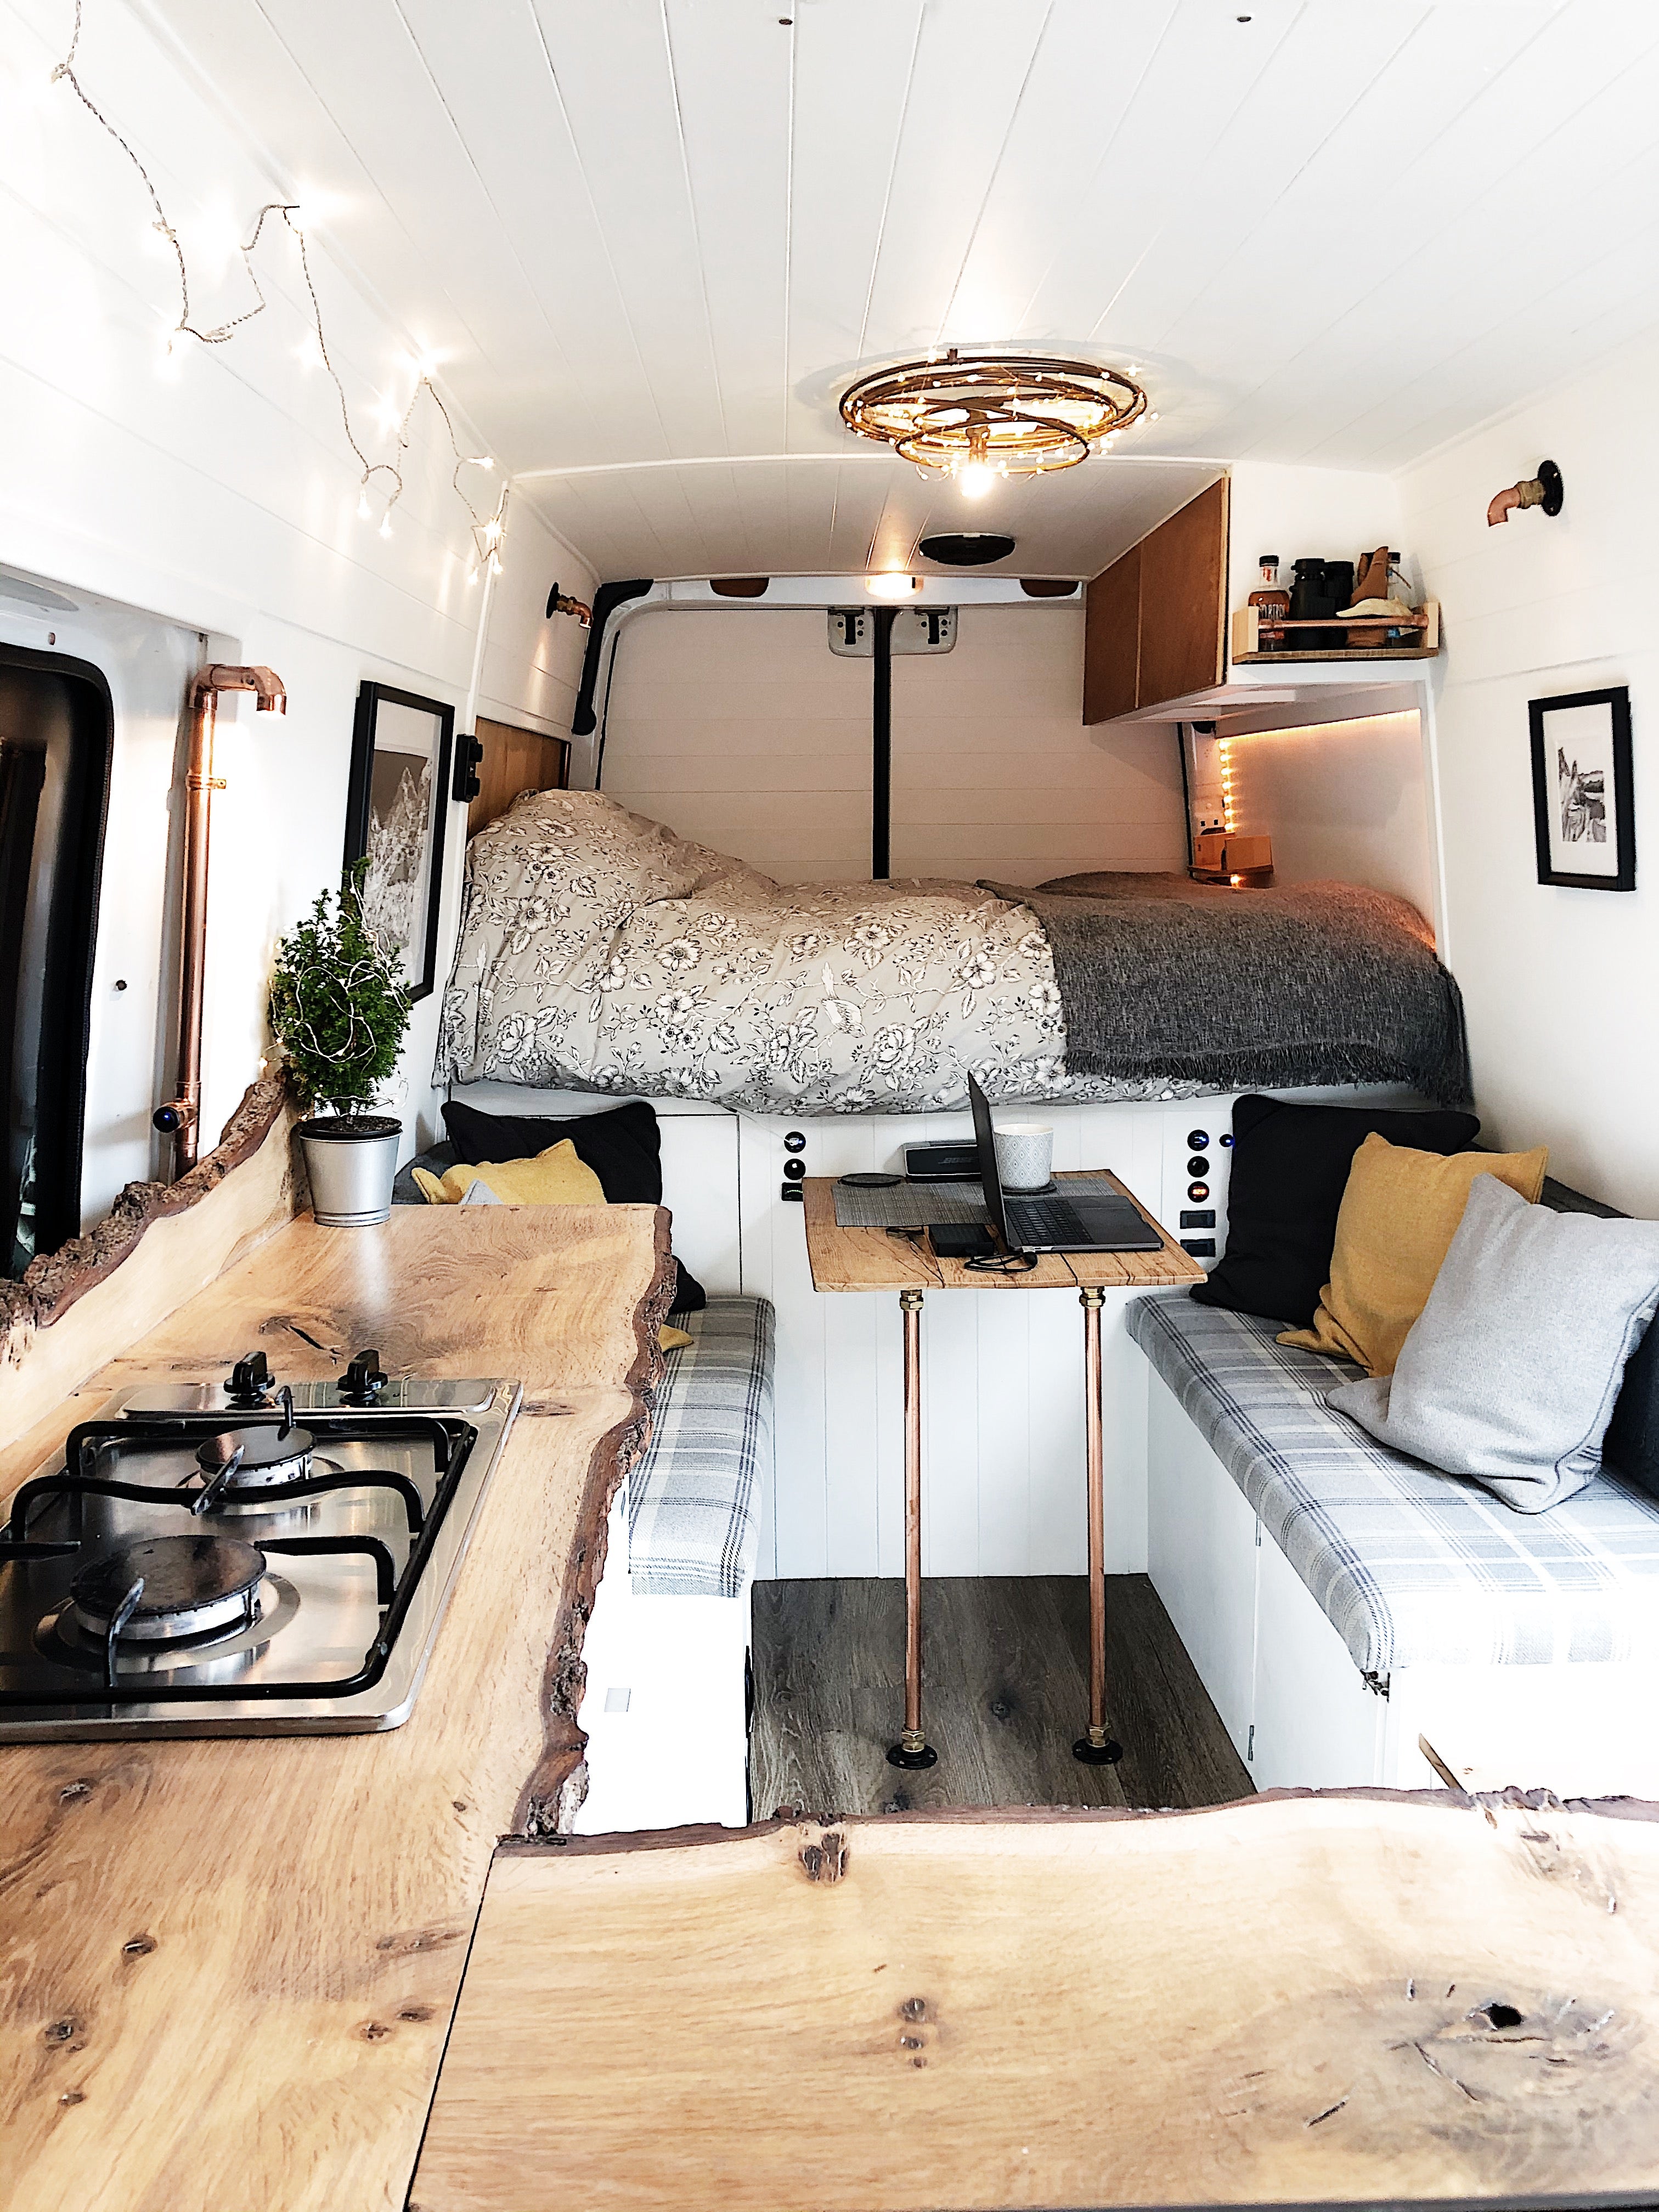 How much does it Cost to Convert a Van into a Campervan? – Brown Bird & Co